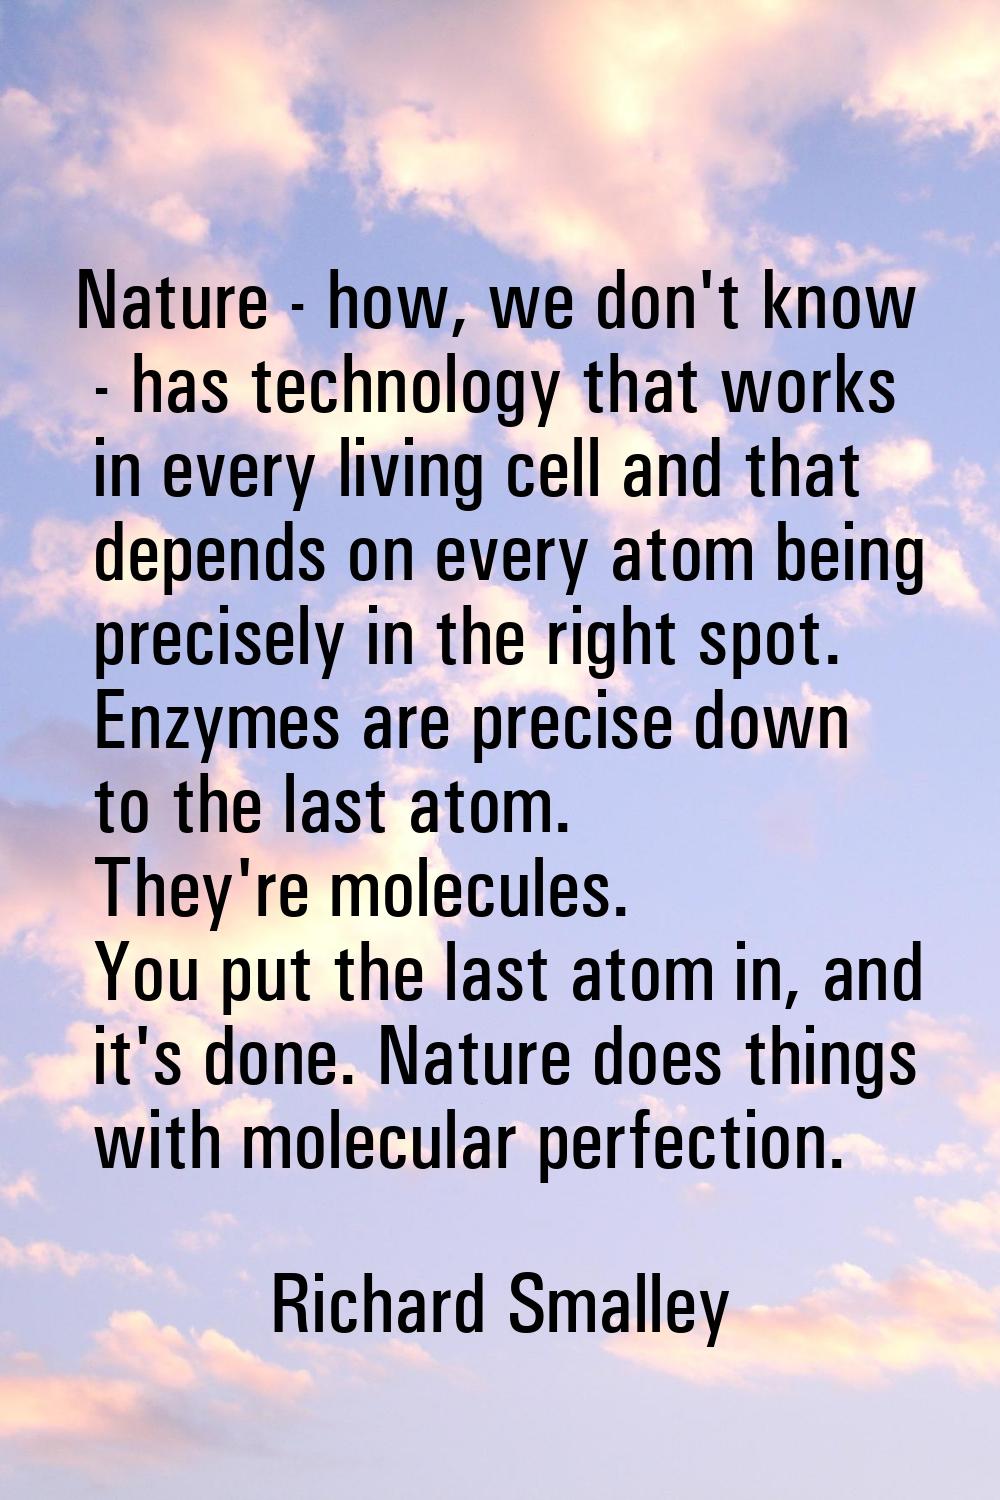 Nature - how, we don't know - has technology that works in every living cell and that depends on ev